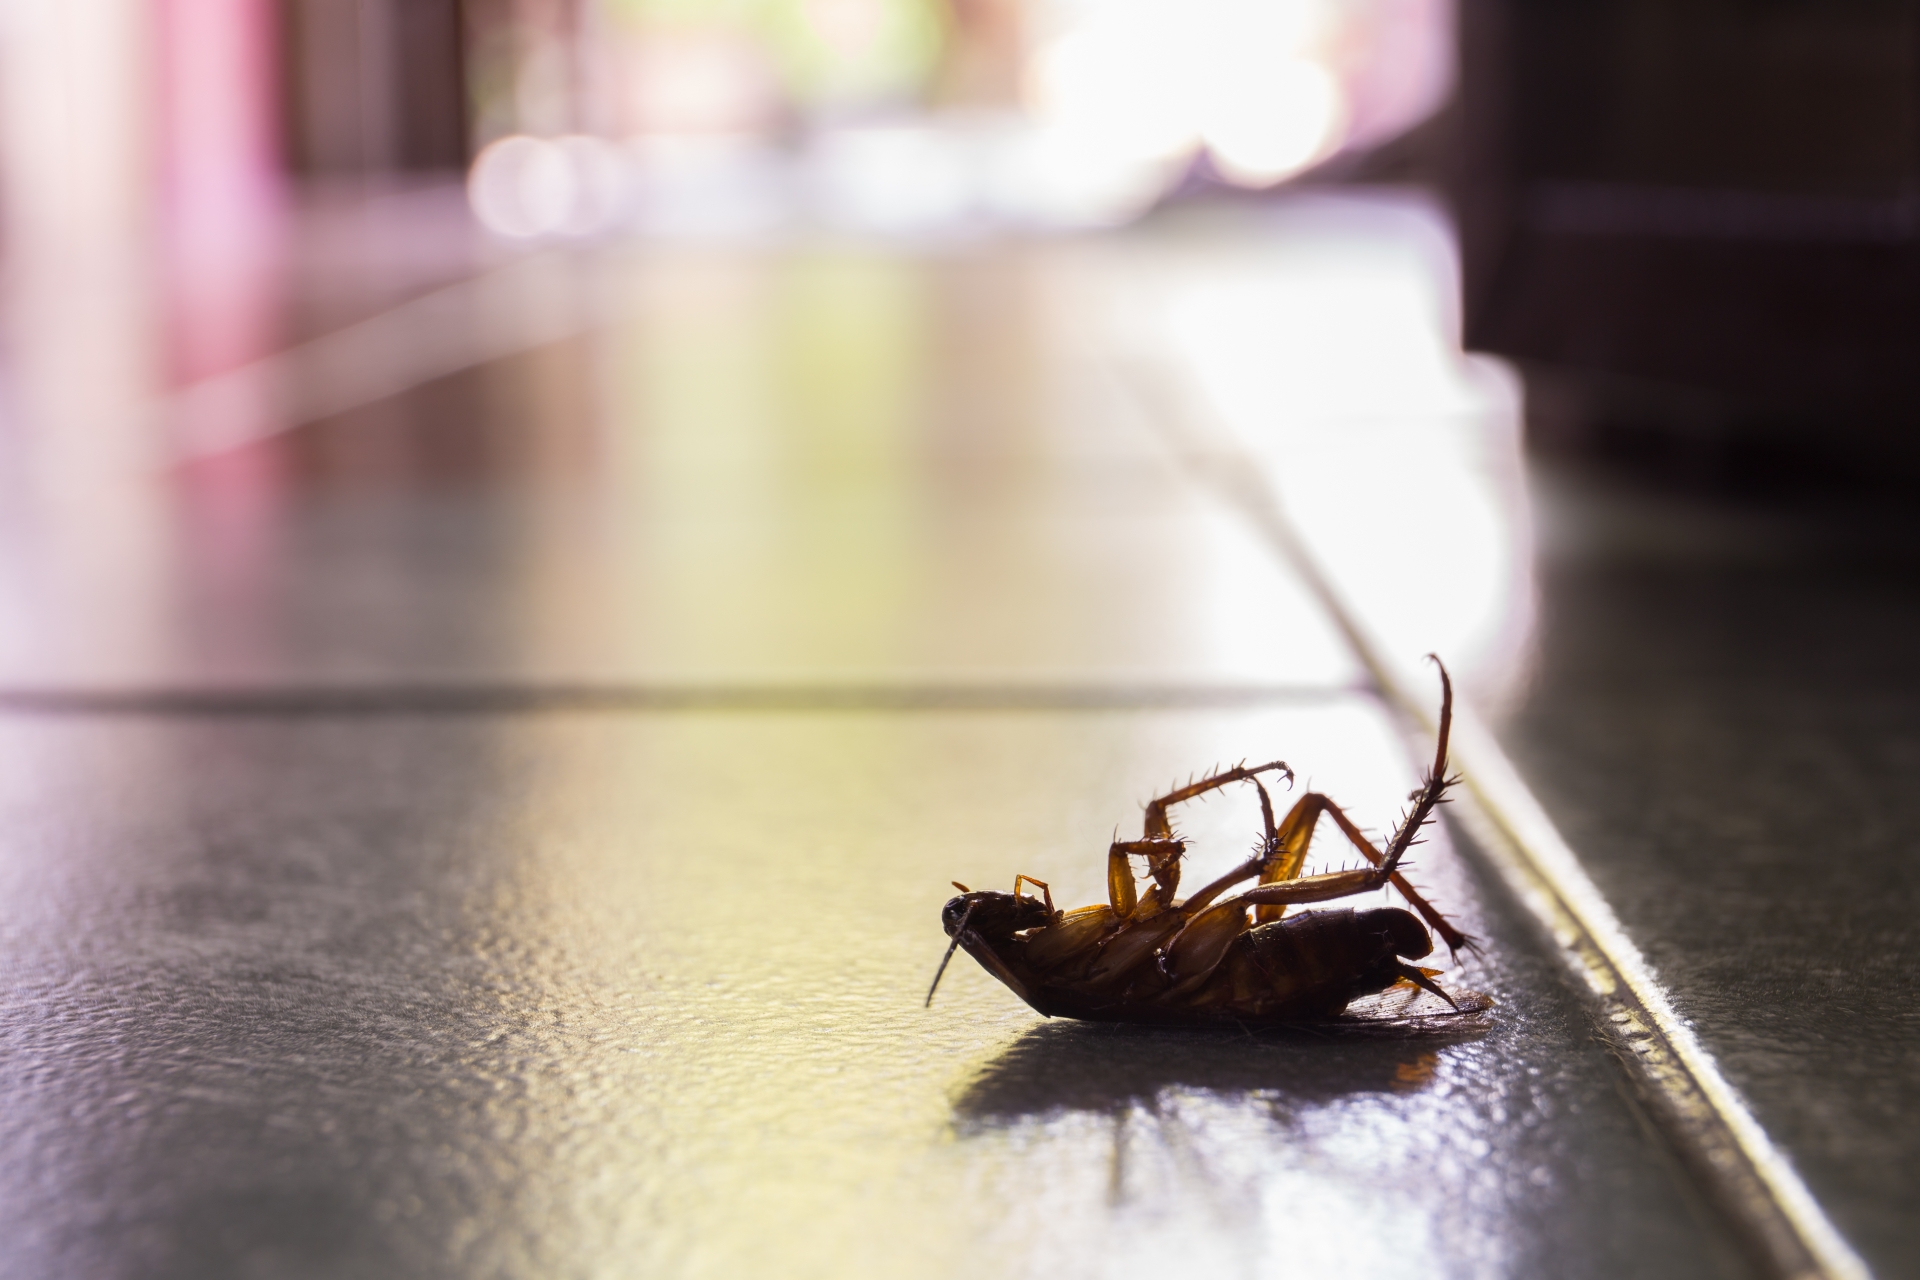 Cockroach Control, Pest Control in Roehampton, SW15. Call Now 020 8166 9746